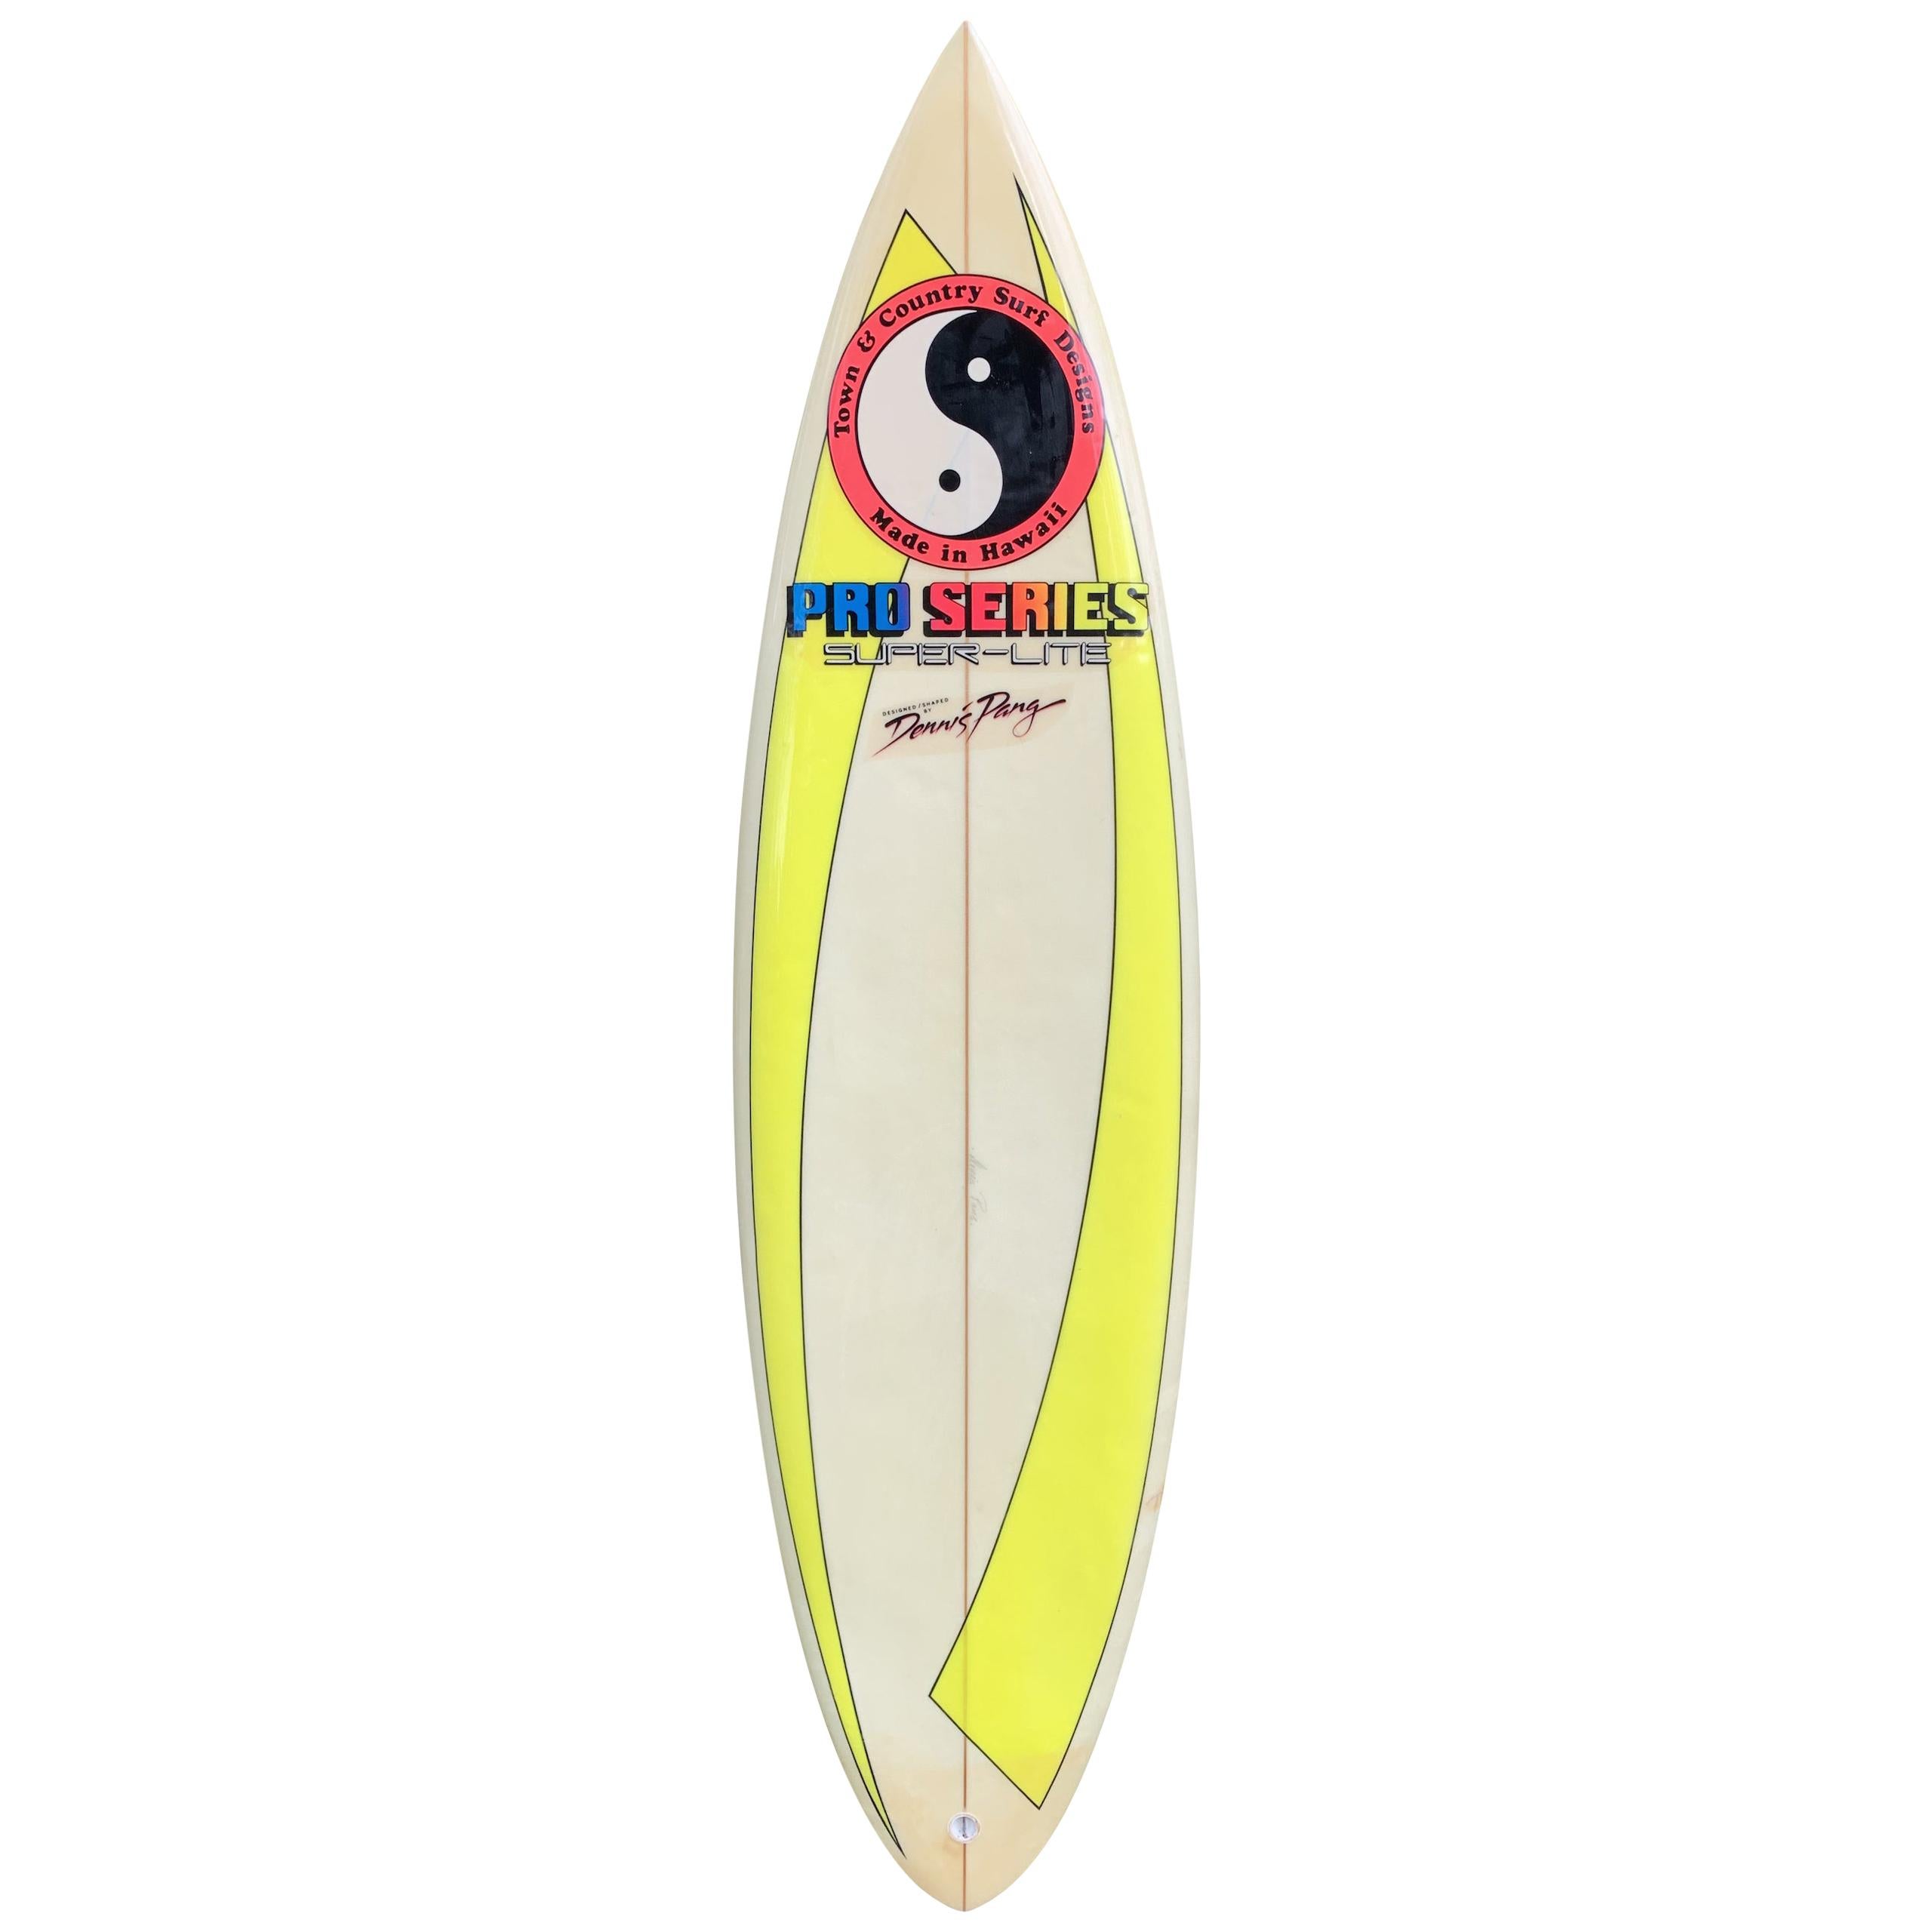 Vintage 1988 Town & Country Surfboard by Dennis Pang